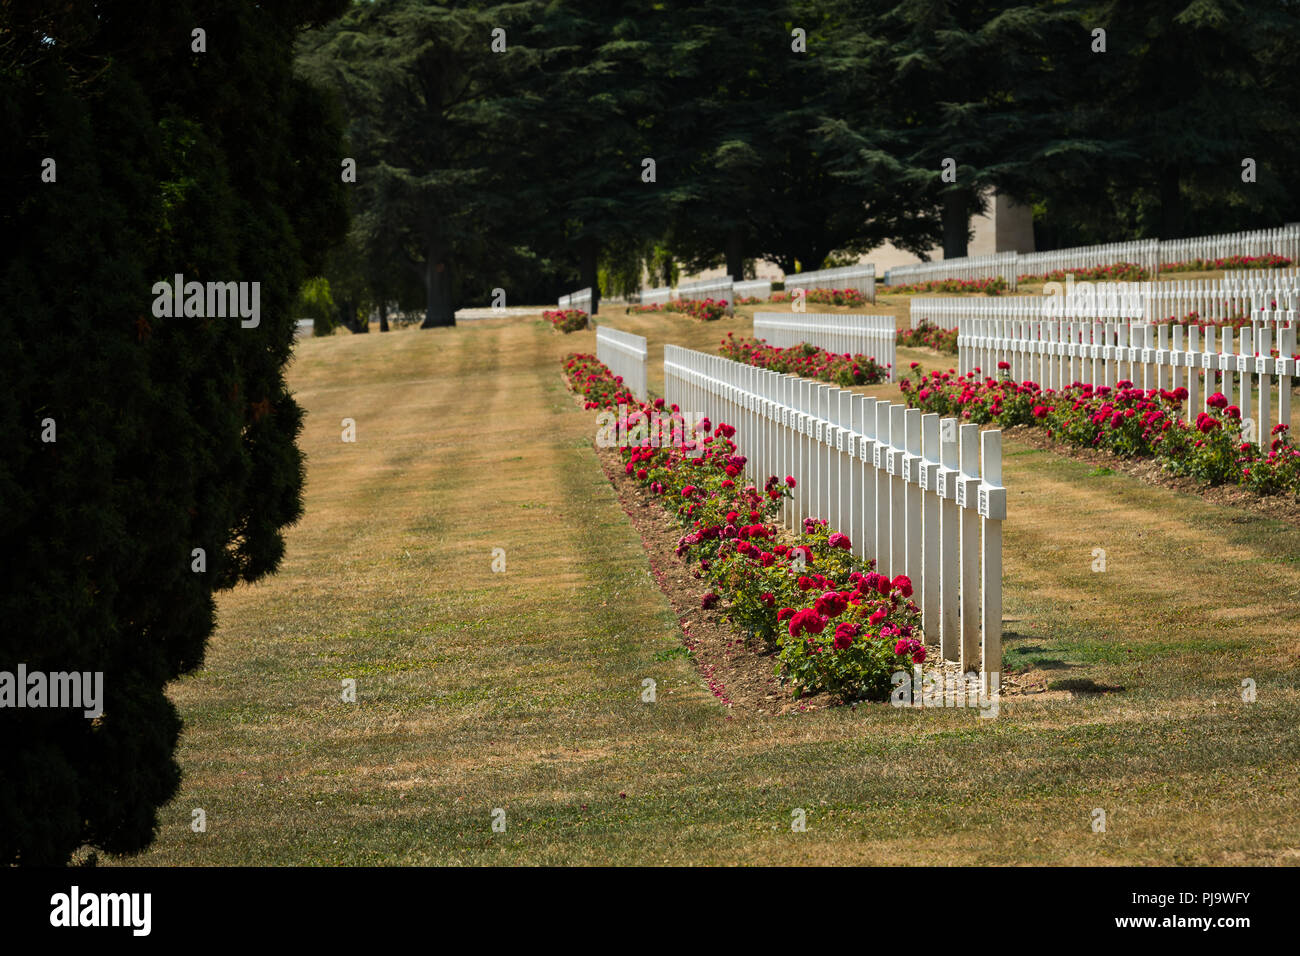 Cemetery outside of the Douaumont ossuary near Verdun France. Memorial of the soldiers who died on the battlefield during the Battle of Verdun in Worl Stock Photo